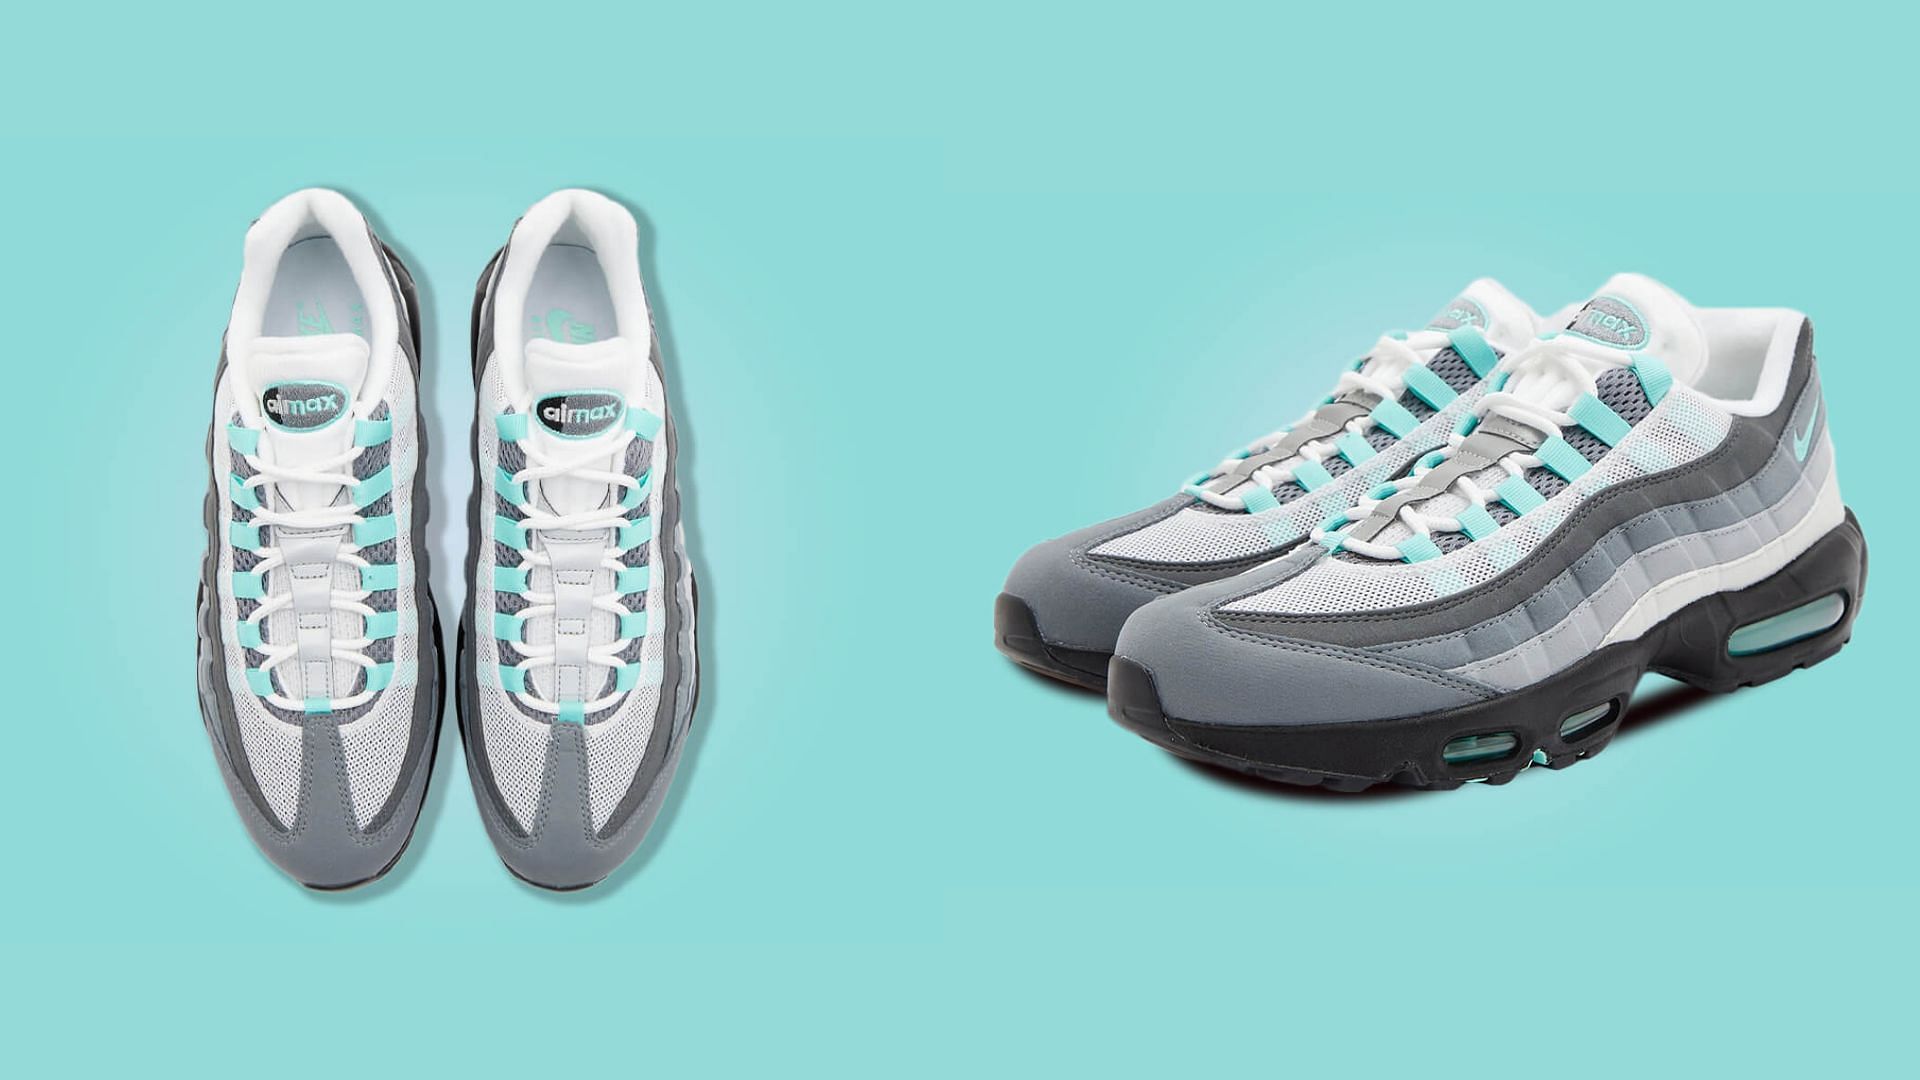 Folkeskole Delvis licens Nike: Nike Air Max 95 "Grey Hyper Turquoise" shoes: Where to get, price,  and more details explored